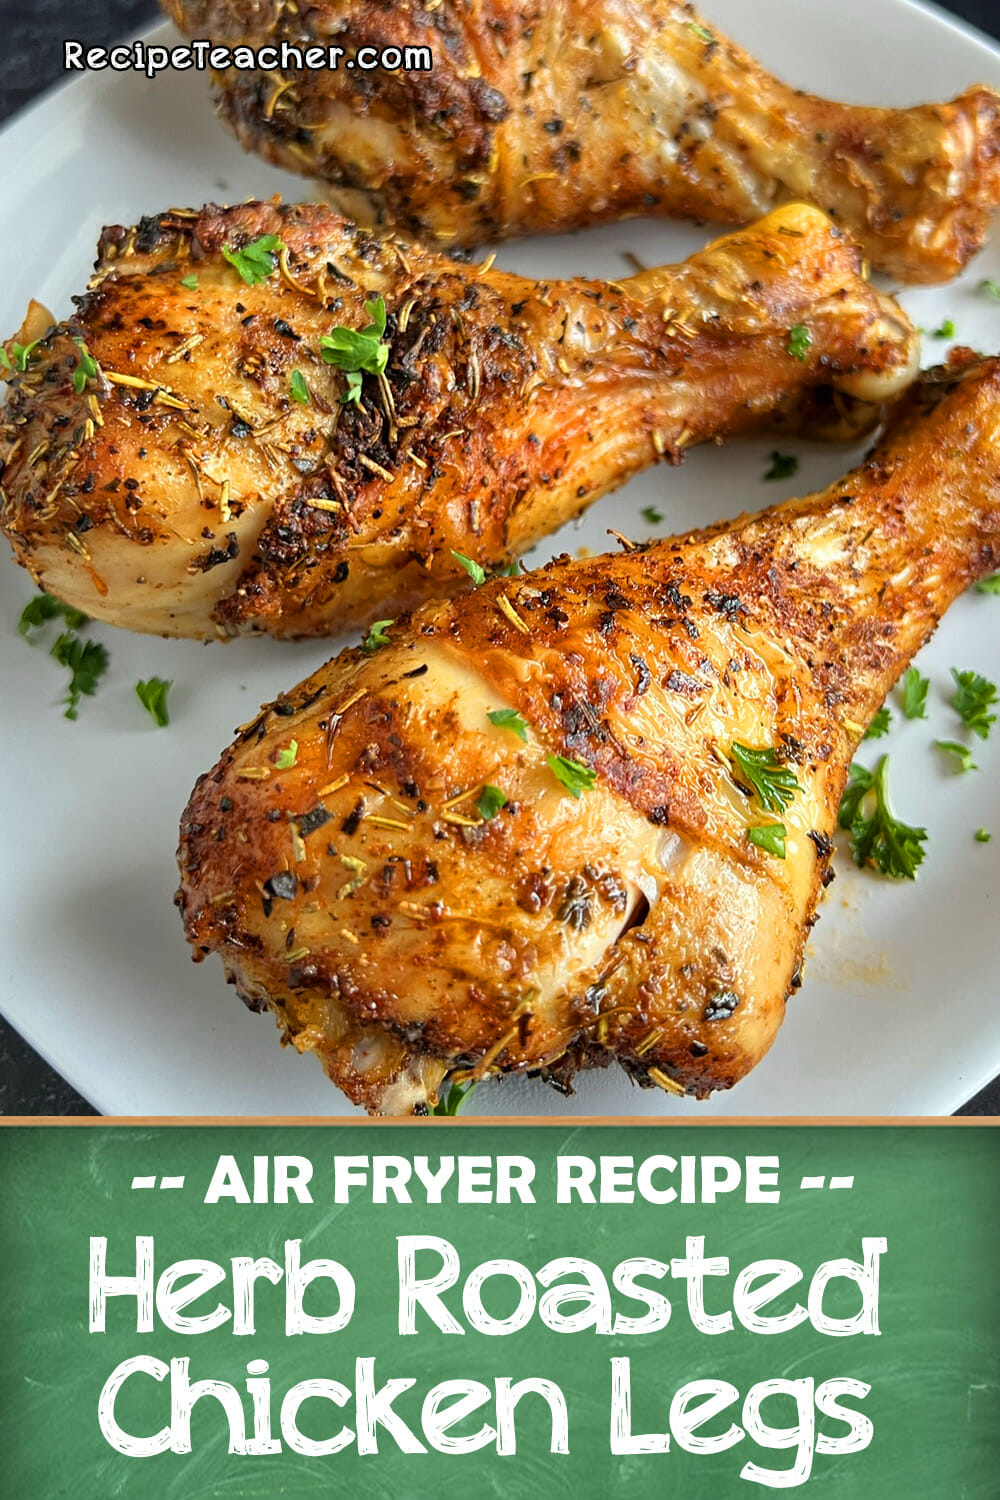 Recipe for air fryre herb roasted chicken legs